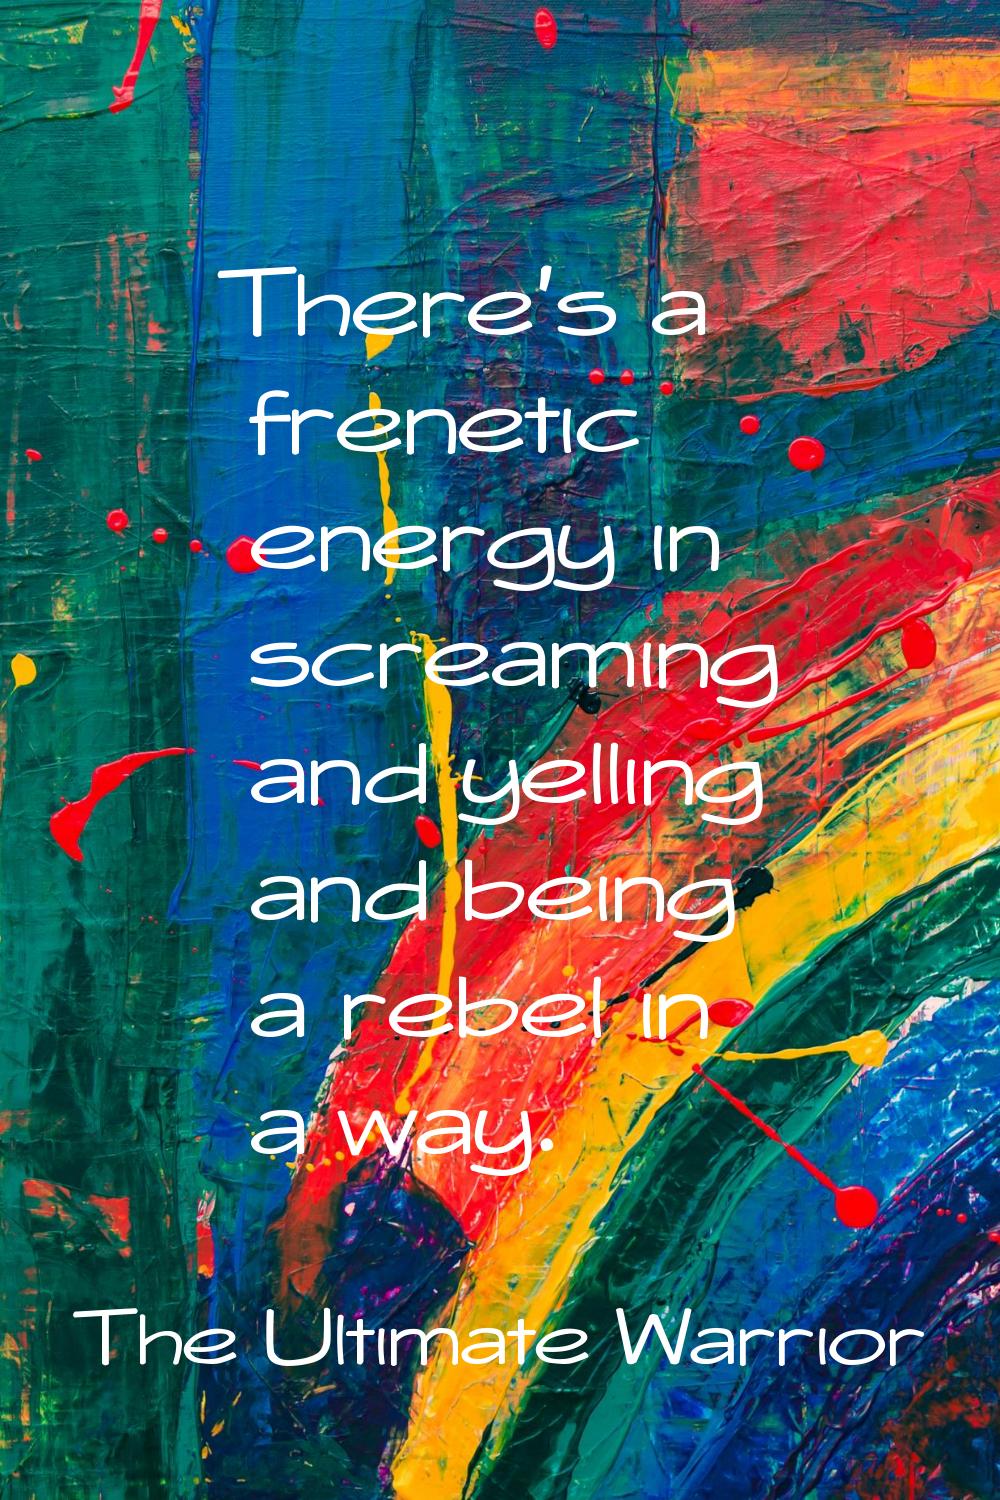 There's a frenetic energy in screaming and yelling and being a rebel in a way.